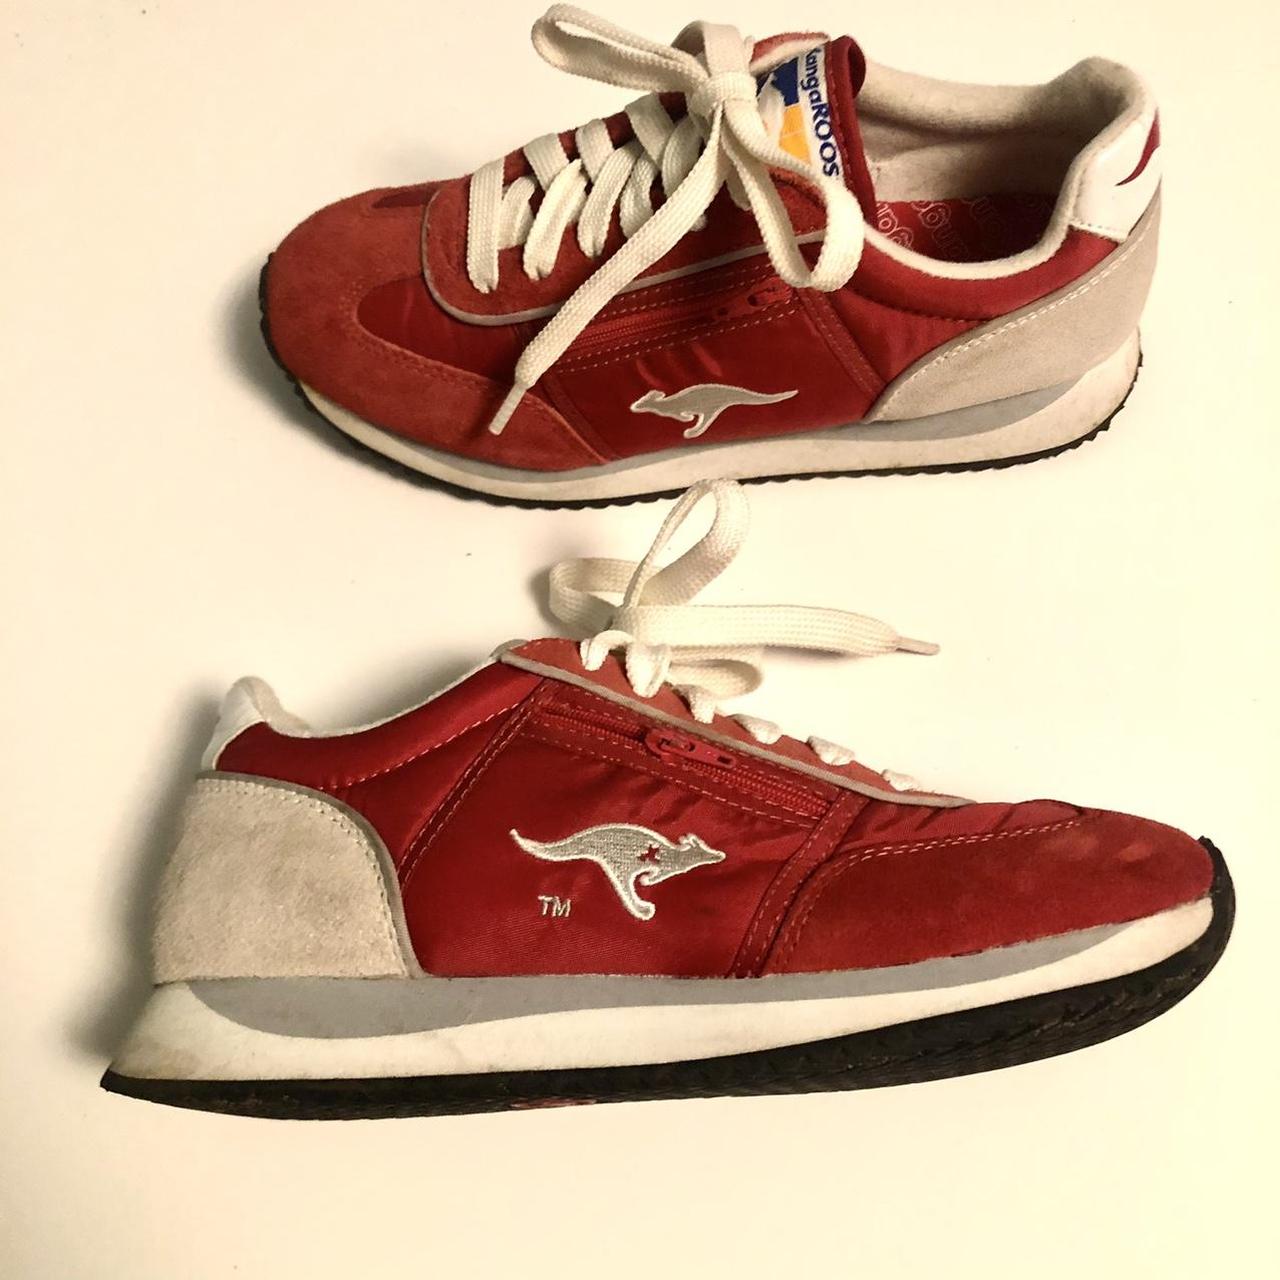 KangaROOS Women's White and Red Trainers (3)